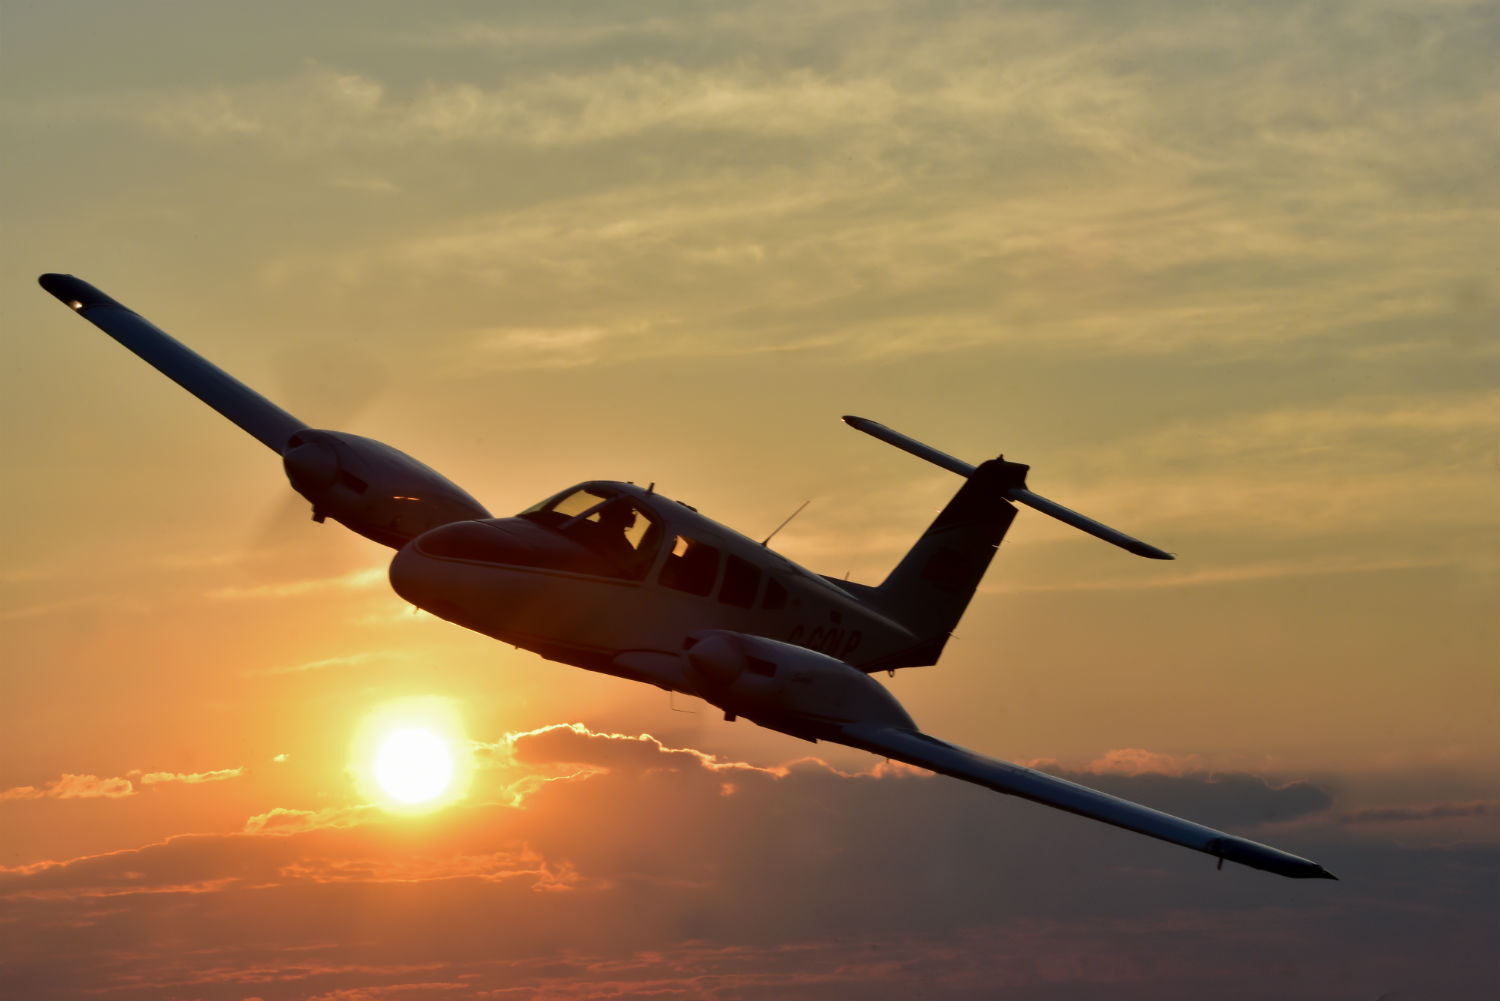 A Piper PA-44-180 Seminole flies over the Waterloo region of Ontario at sunset.